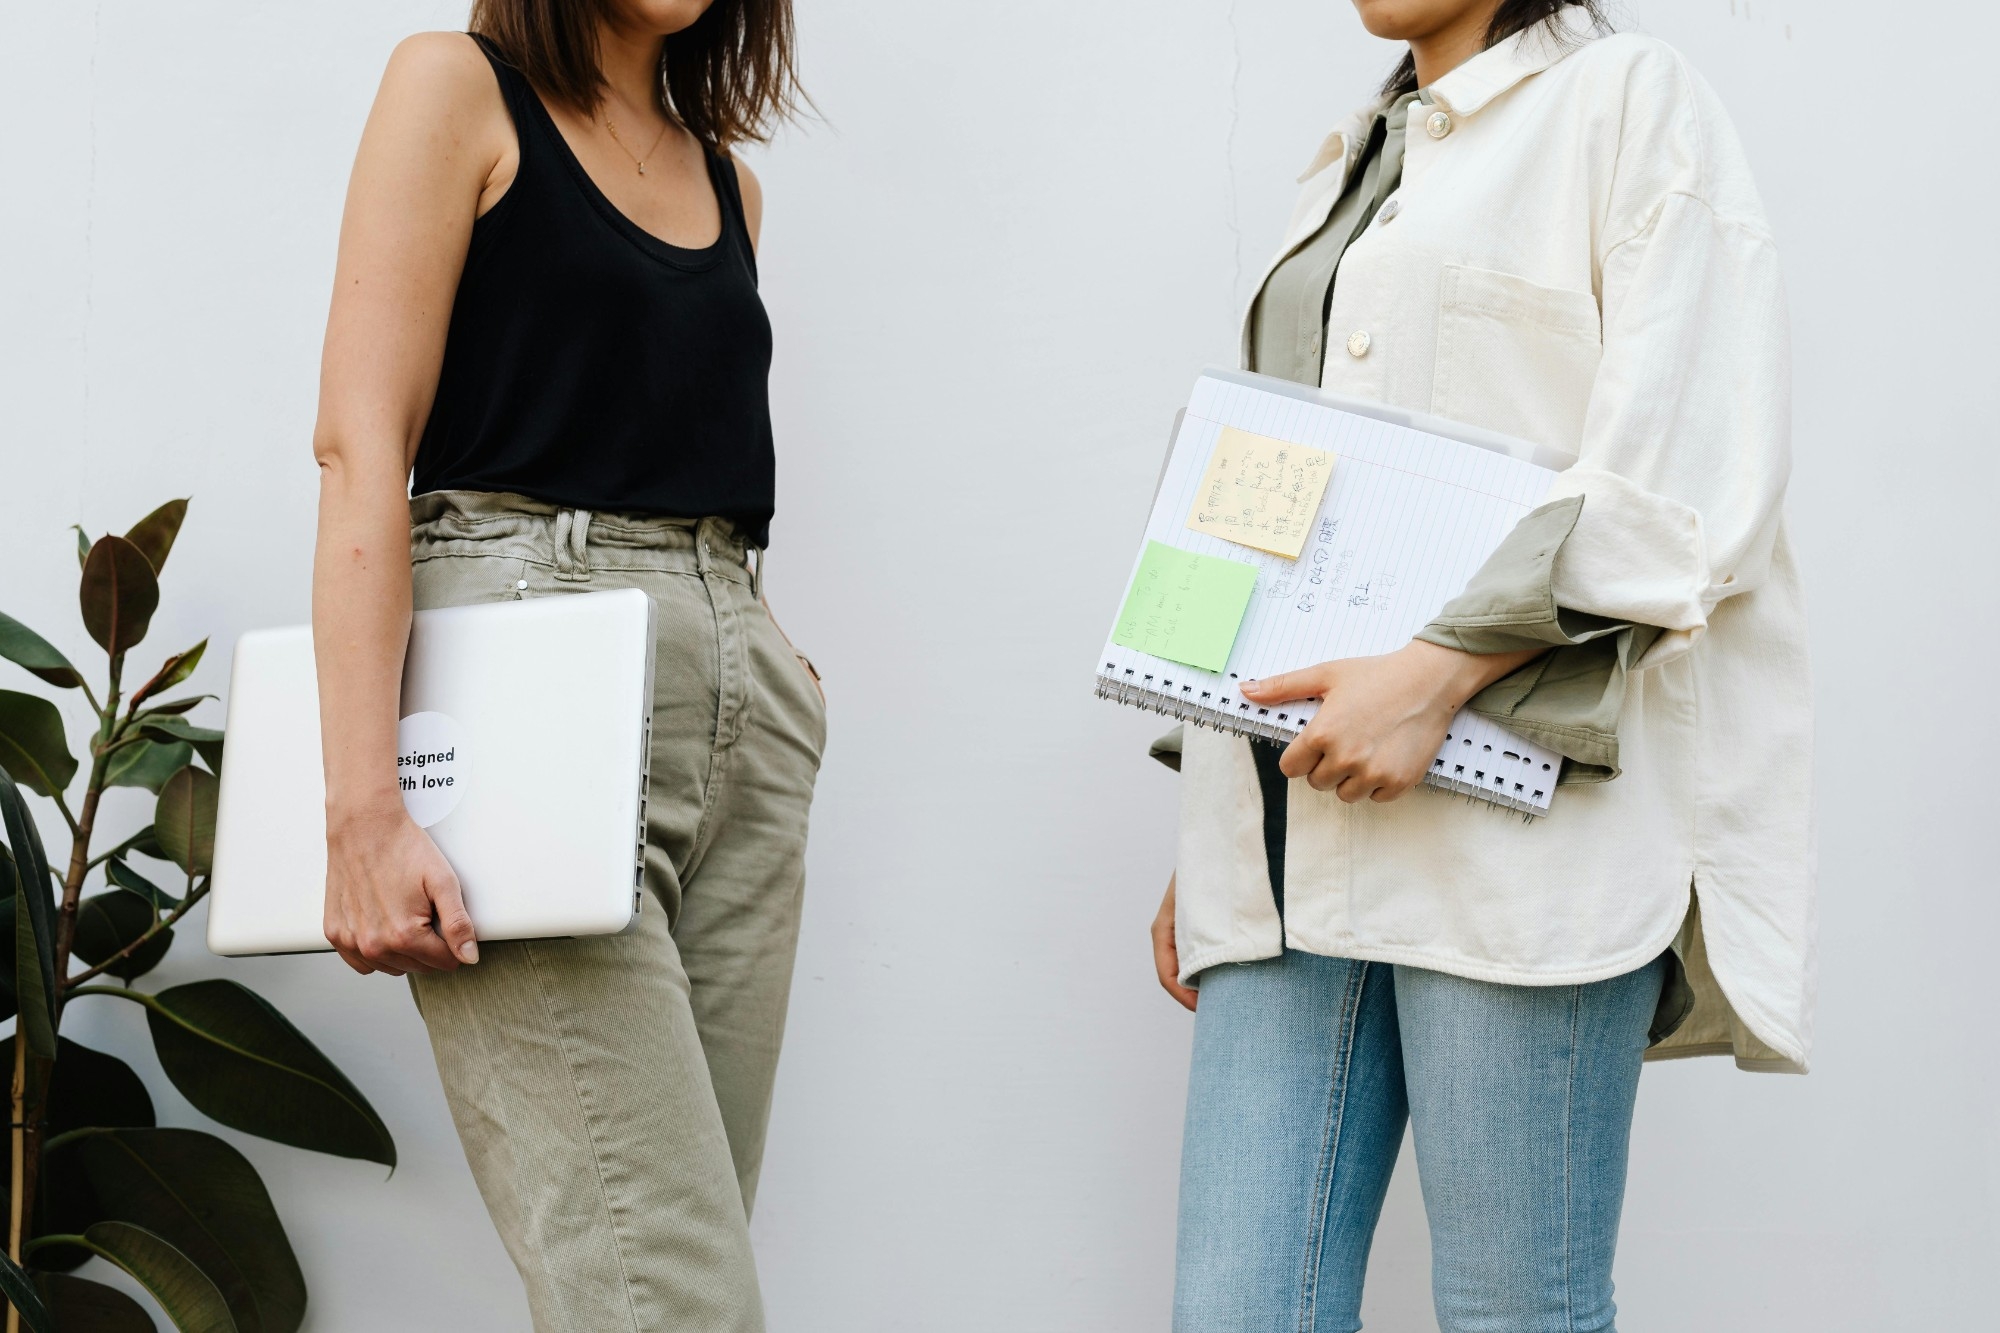 Two dialogue practitioners standing in an office, one holds a laptop and the other holds a notebook with sticky notes on it, the image is cropped below their faces so only torsos are seen